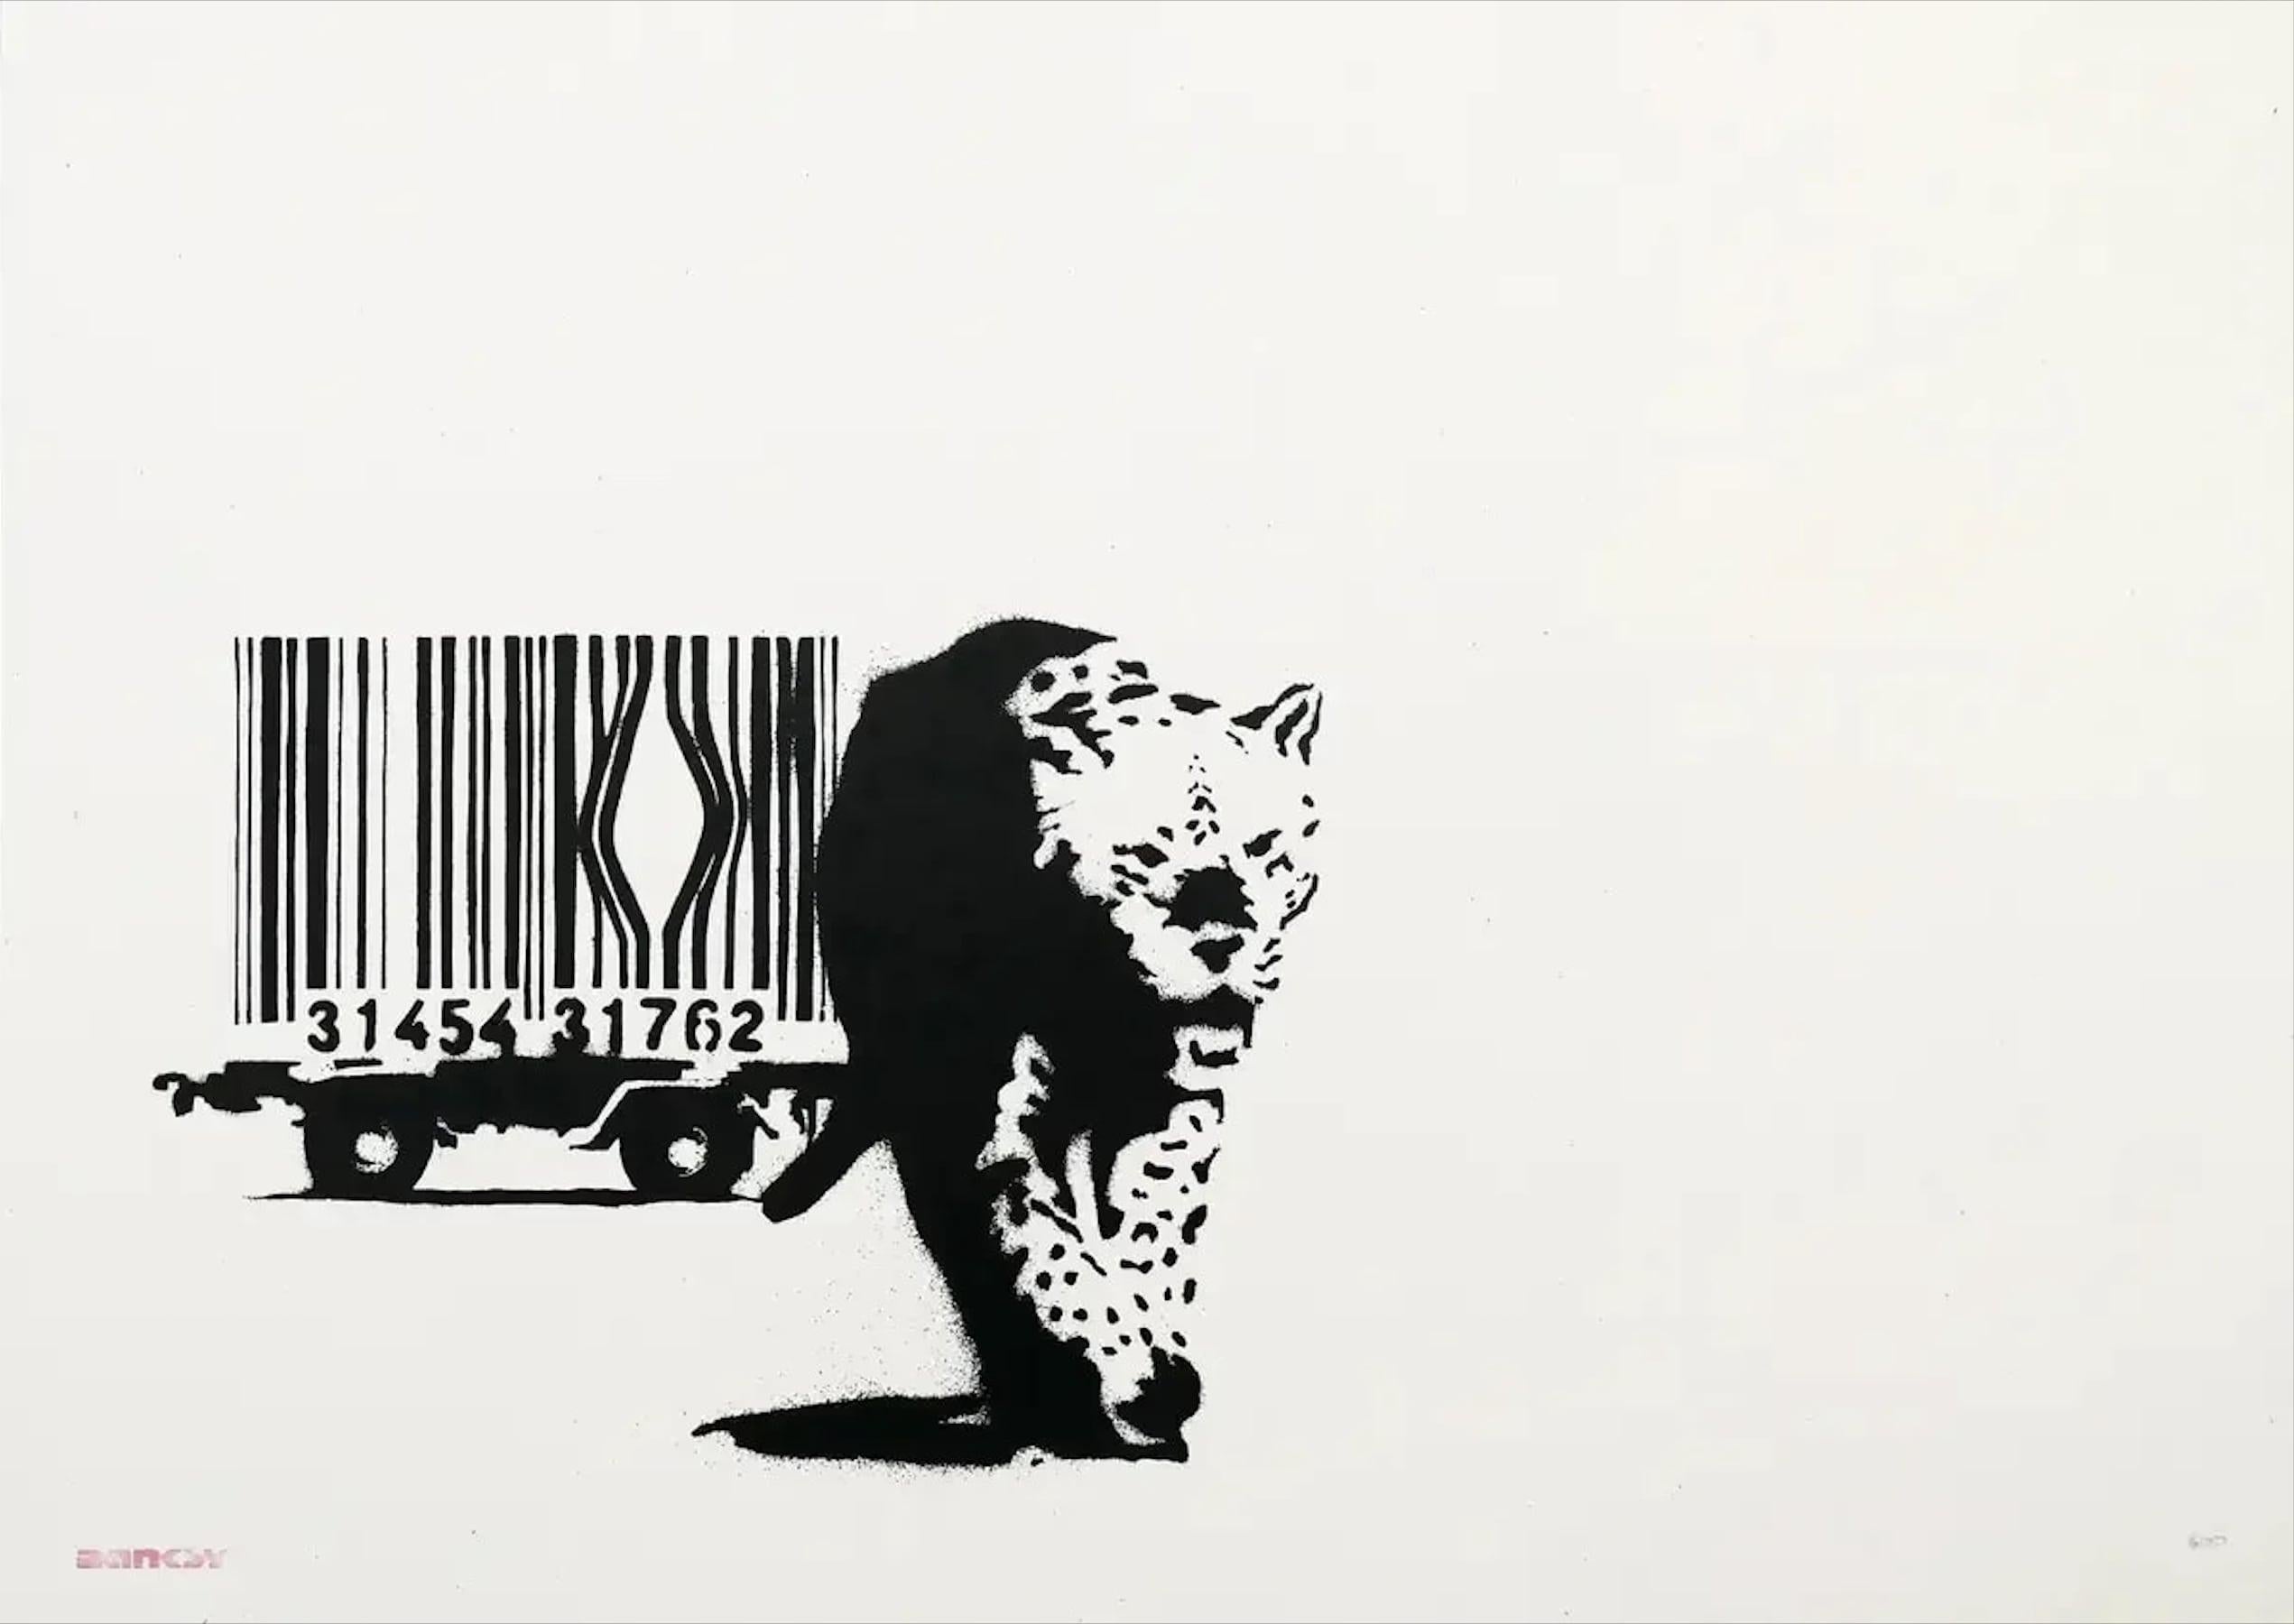 by Banksy 

BARCODE (UNSIGNED), 2004
Screenprint
19 3/4 x 27 1/2 in
50 x 70 cm
Edition of 600
Unsigned